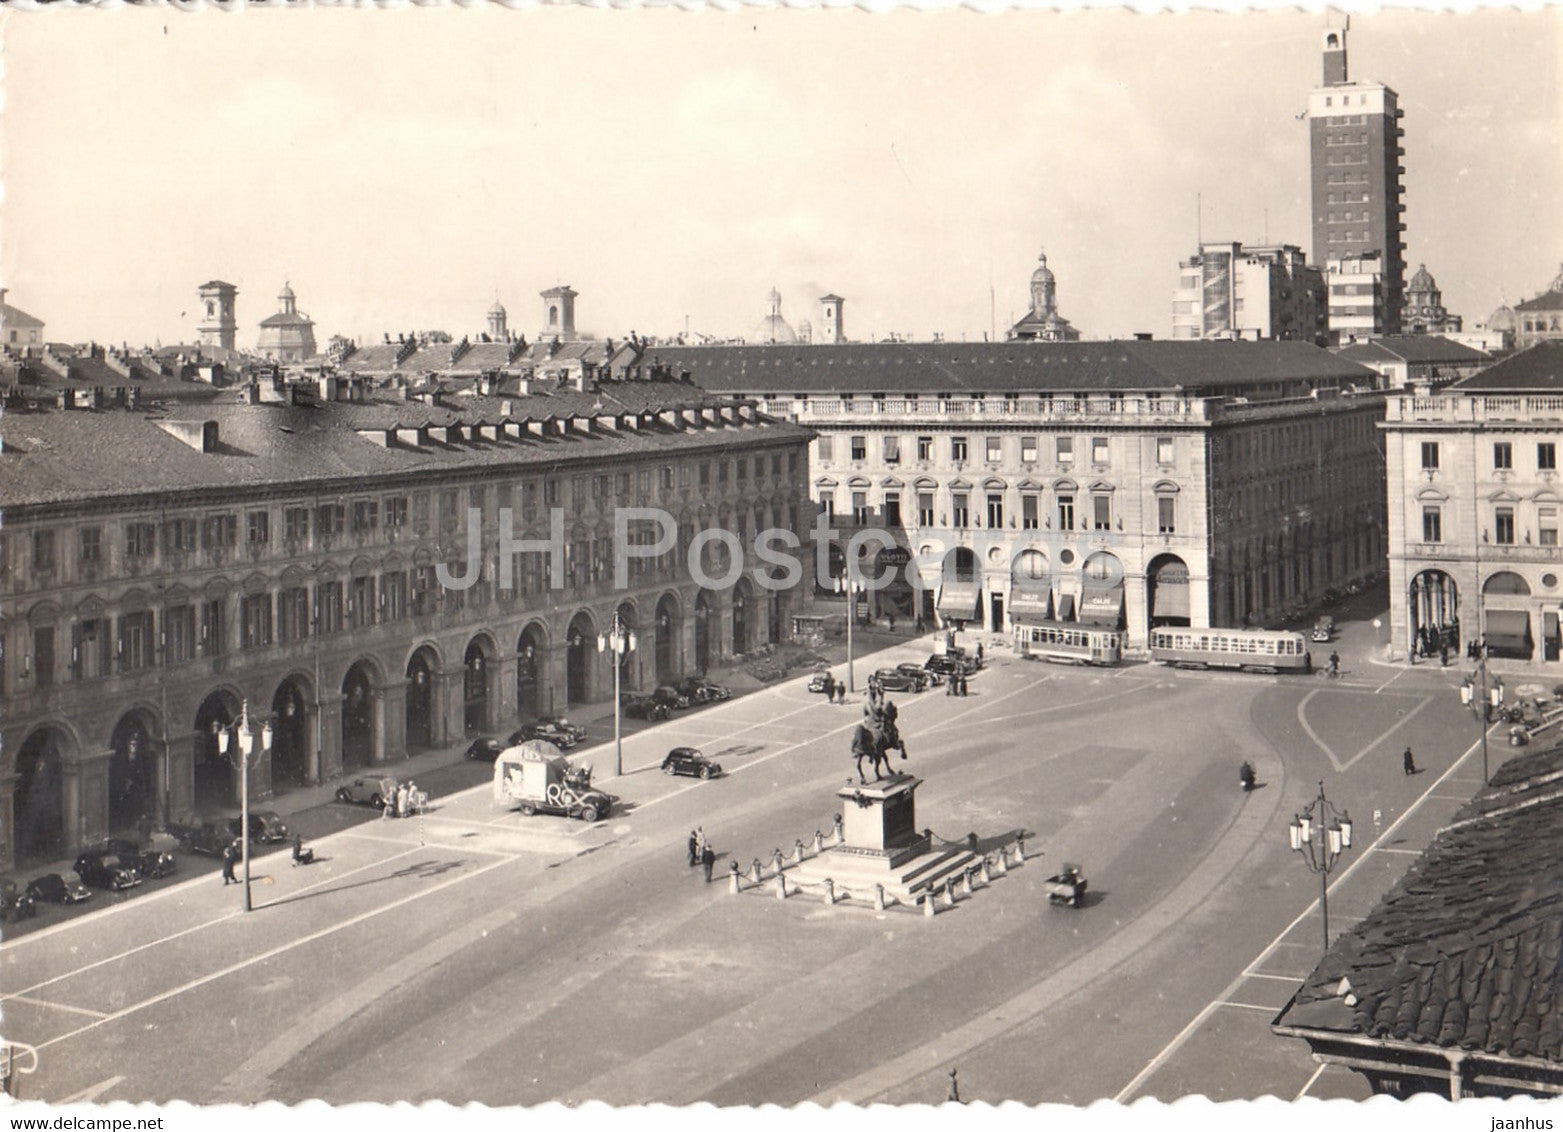 Torino - Turin - Piazza S Carlo - square - tram - old postcard - 1949 - Italy - used - JH Postcards